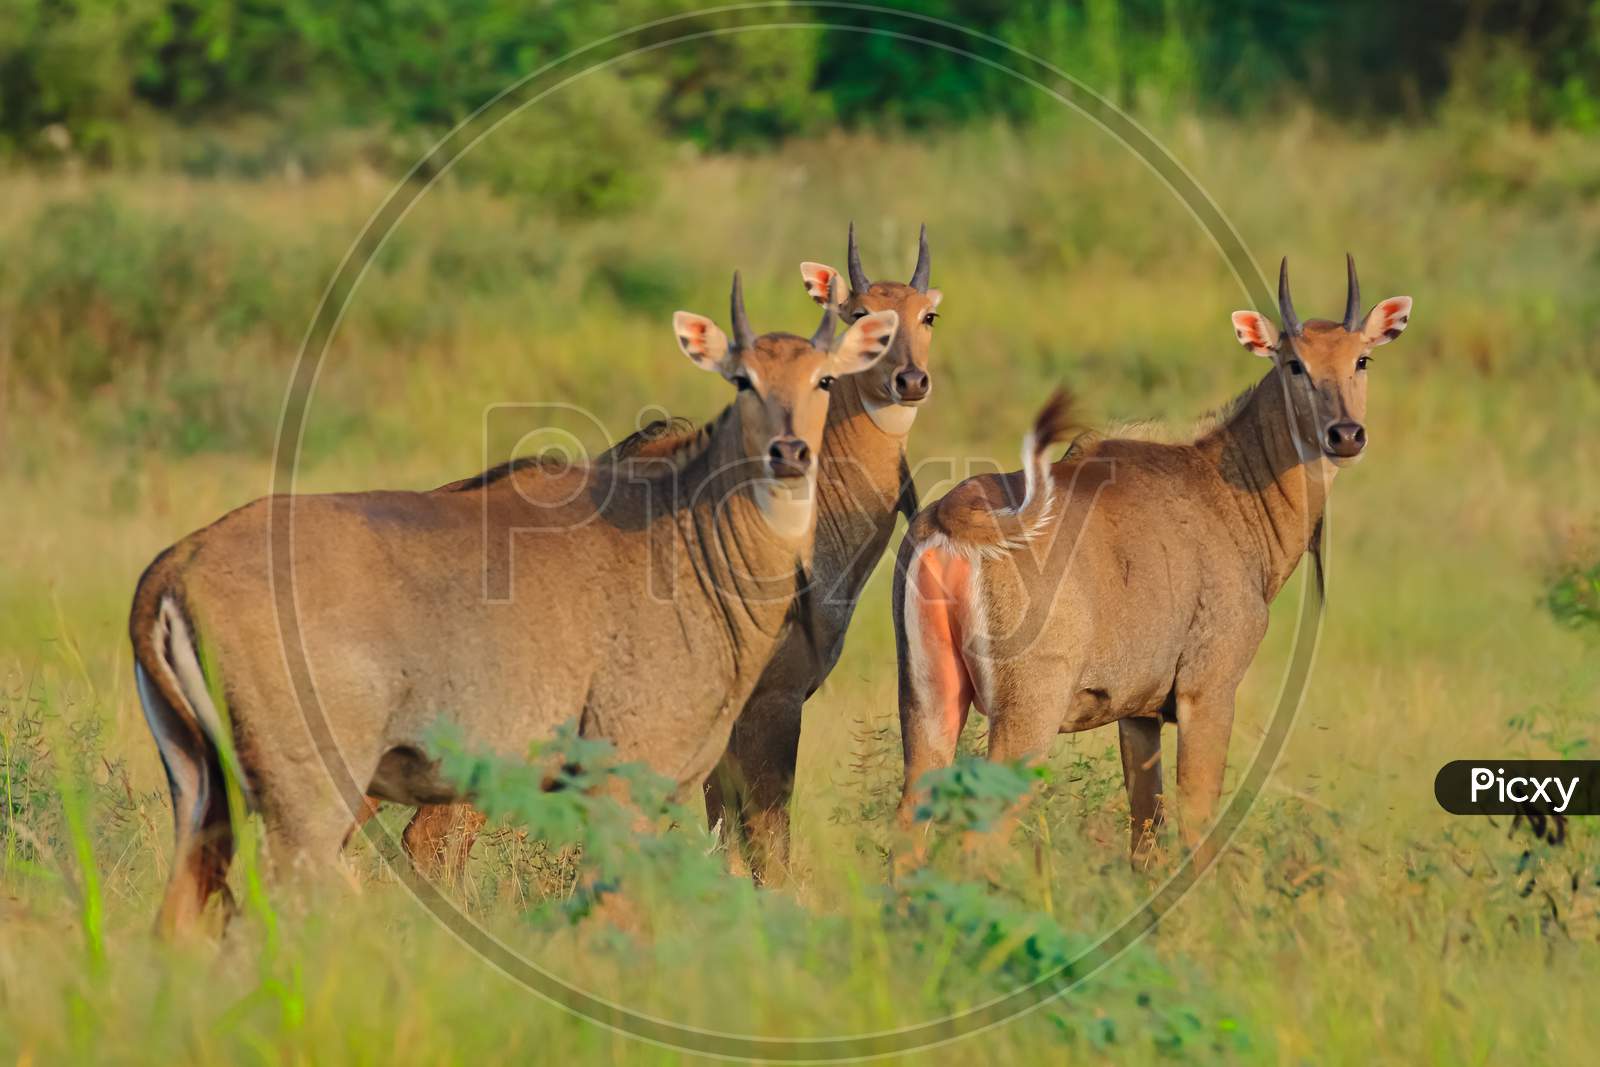 Family of nilgai also known as blue bull